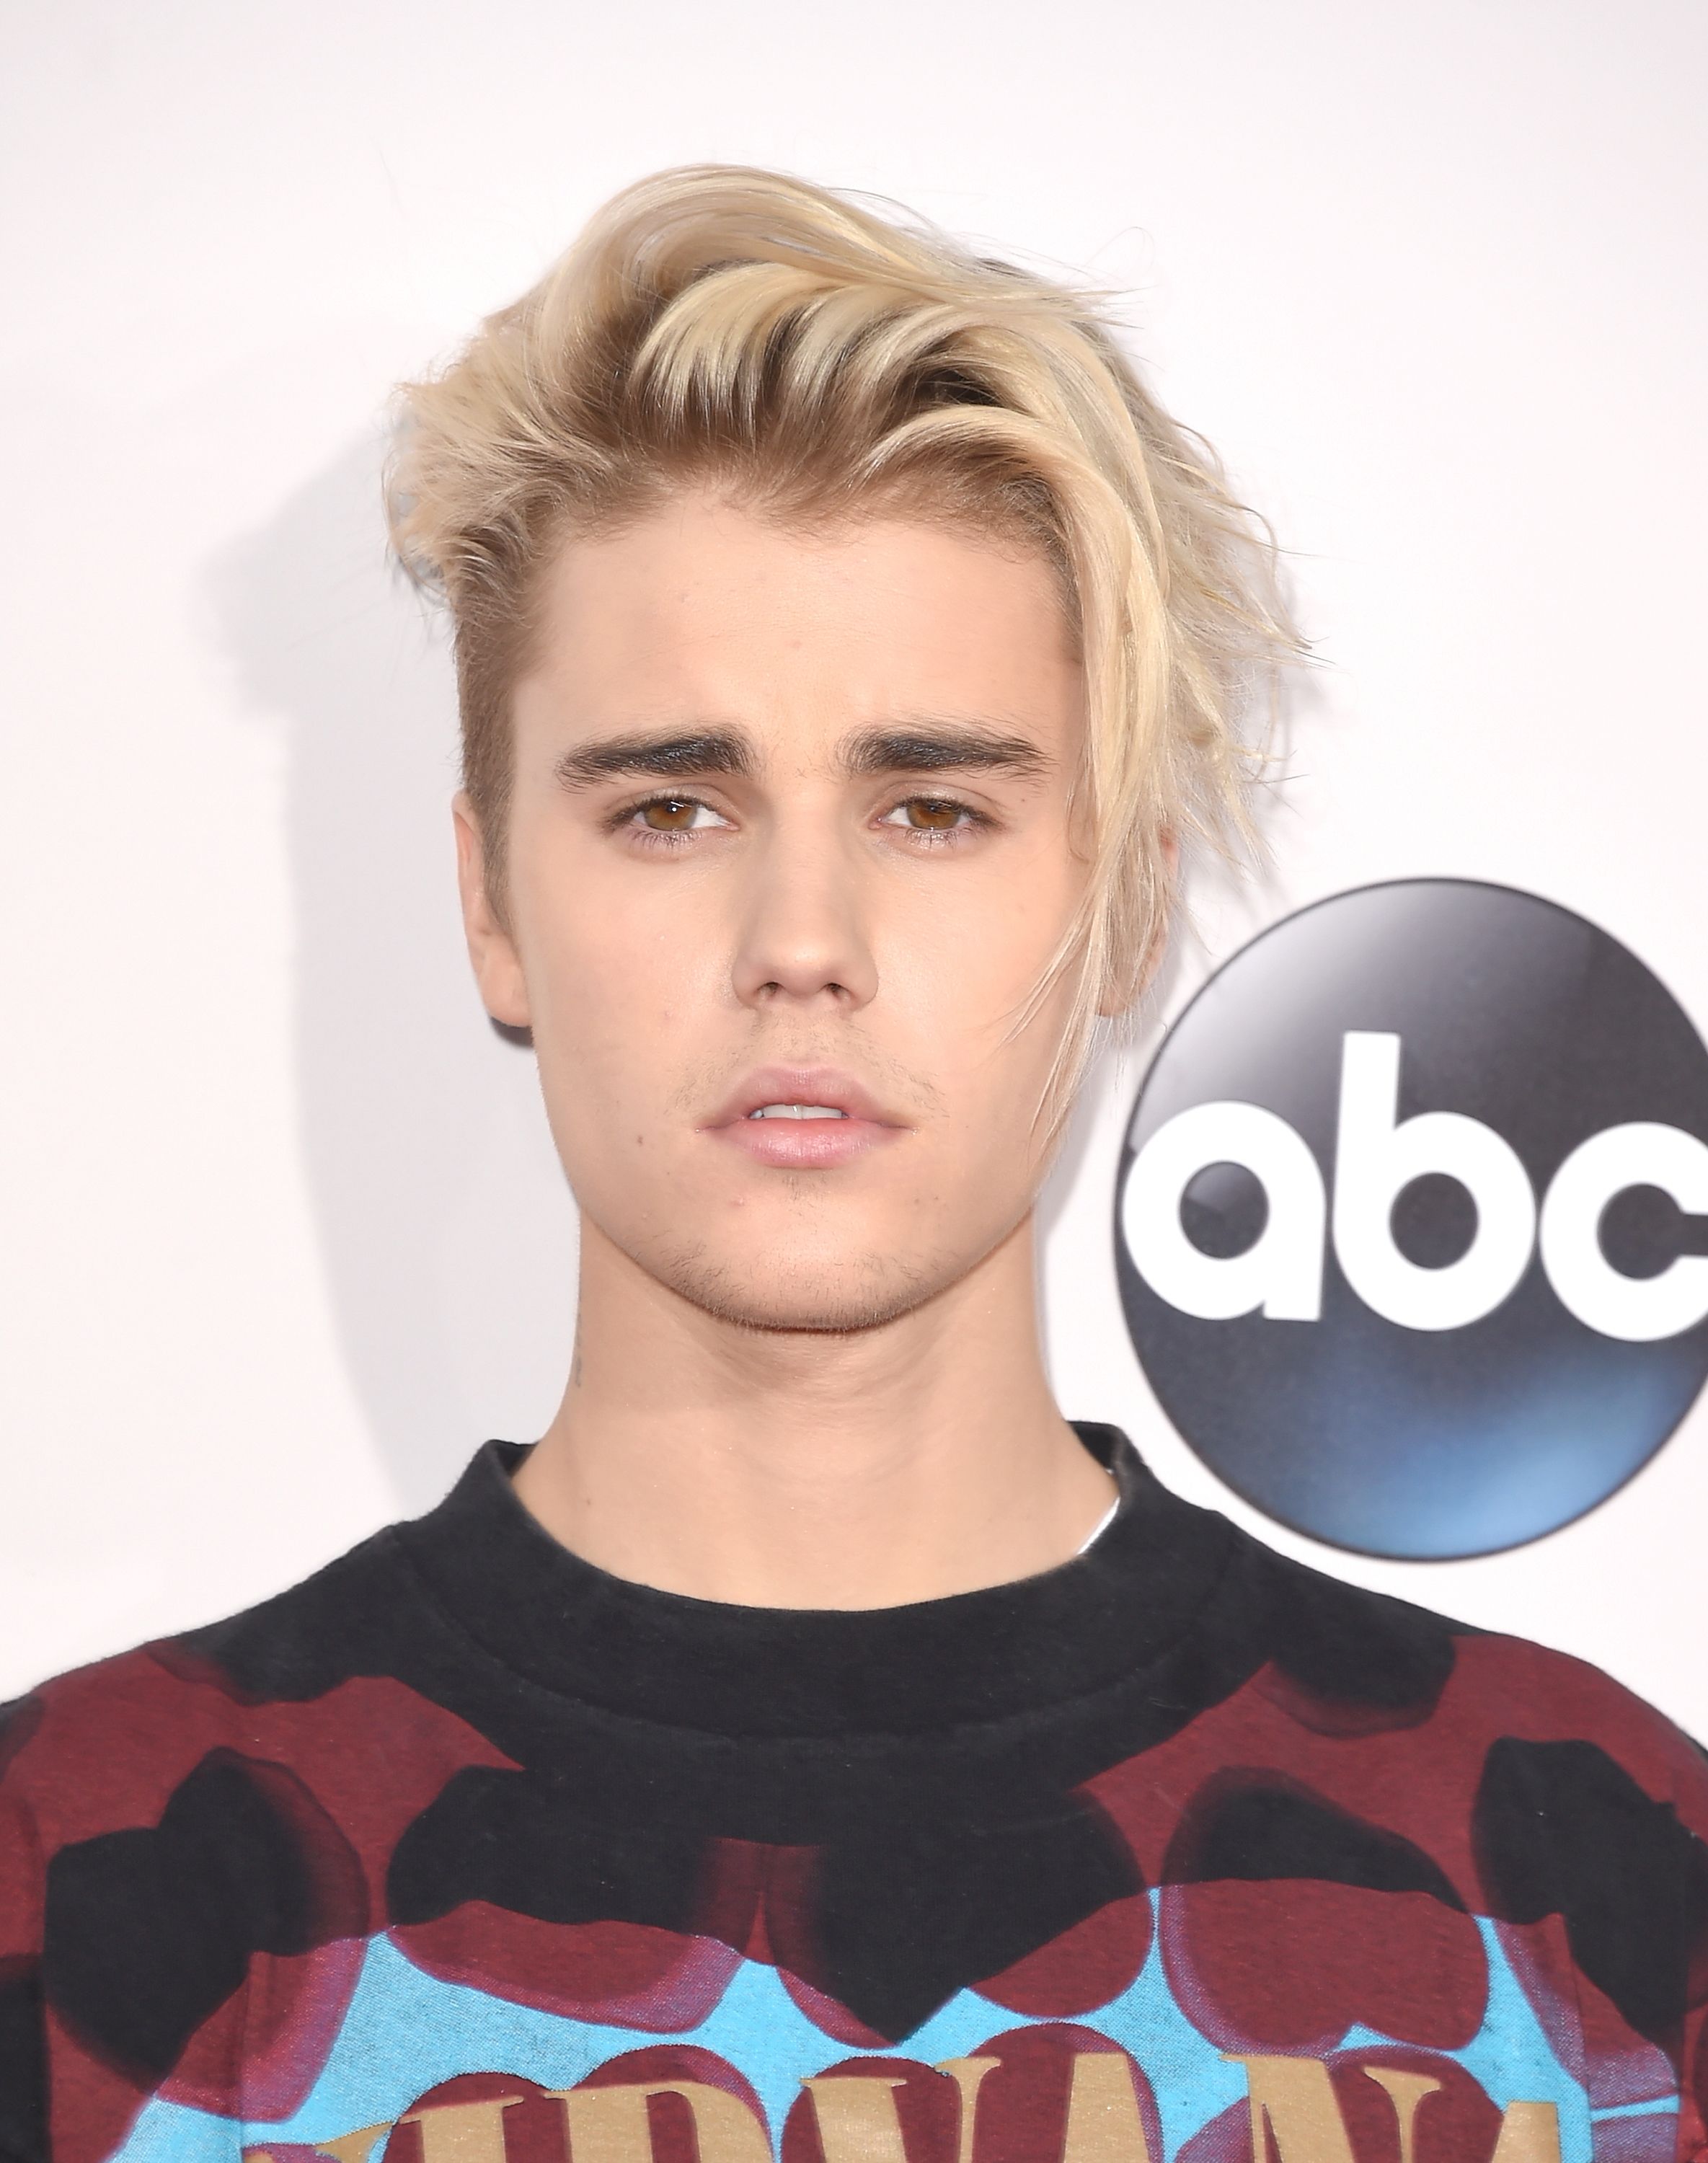 All Of Justin Bieber's Hairstyles In 2015 Will Make You Belieb In The Transformative Power Of Bleach